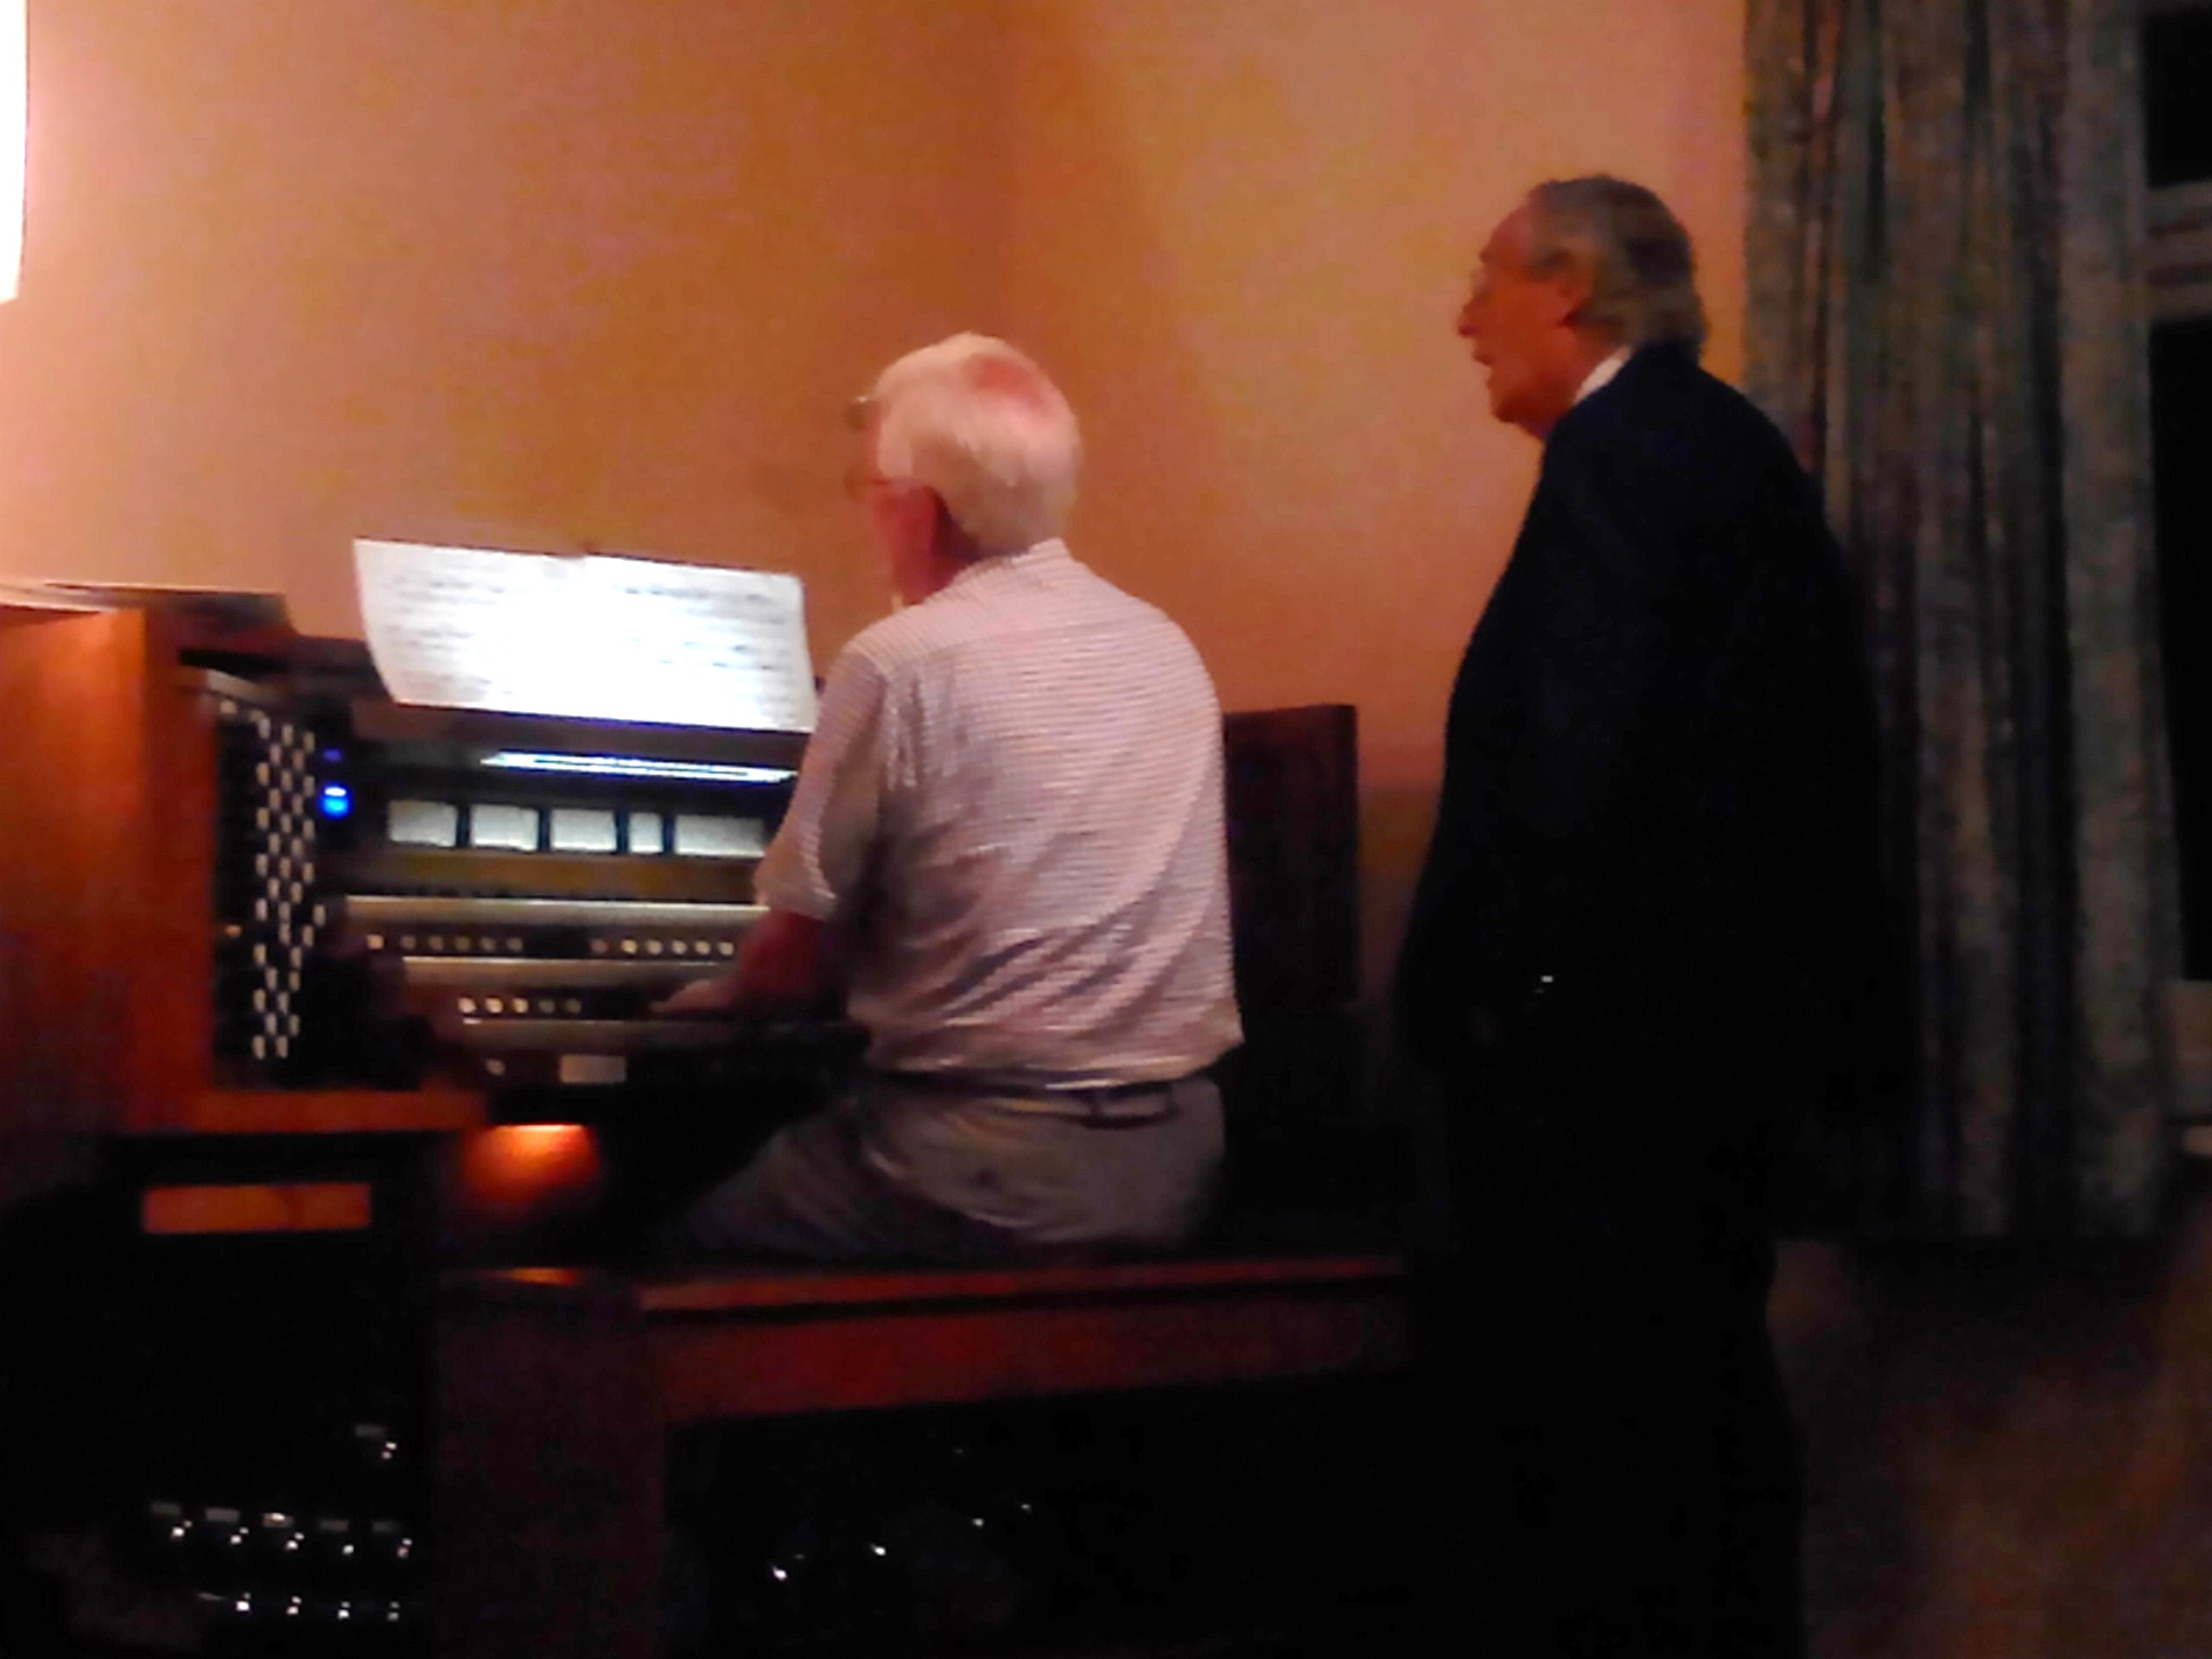 Image: Ted playing the organ